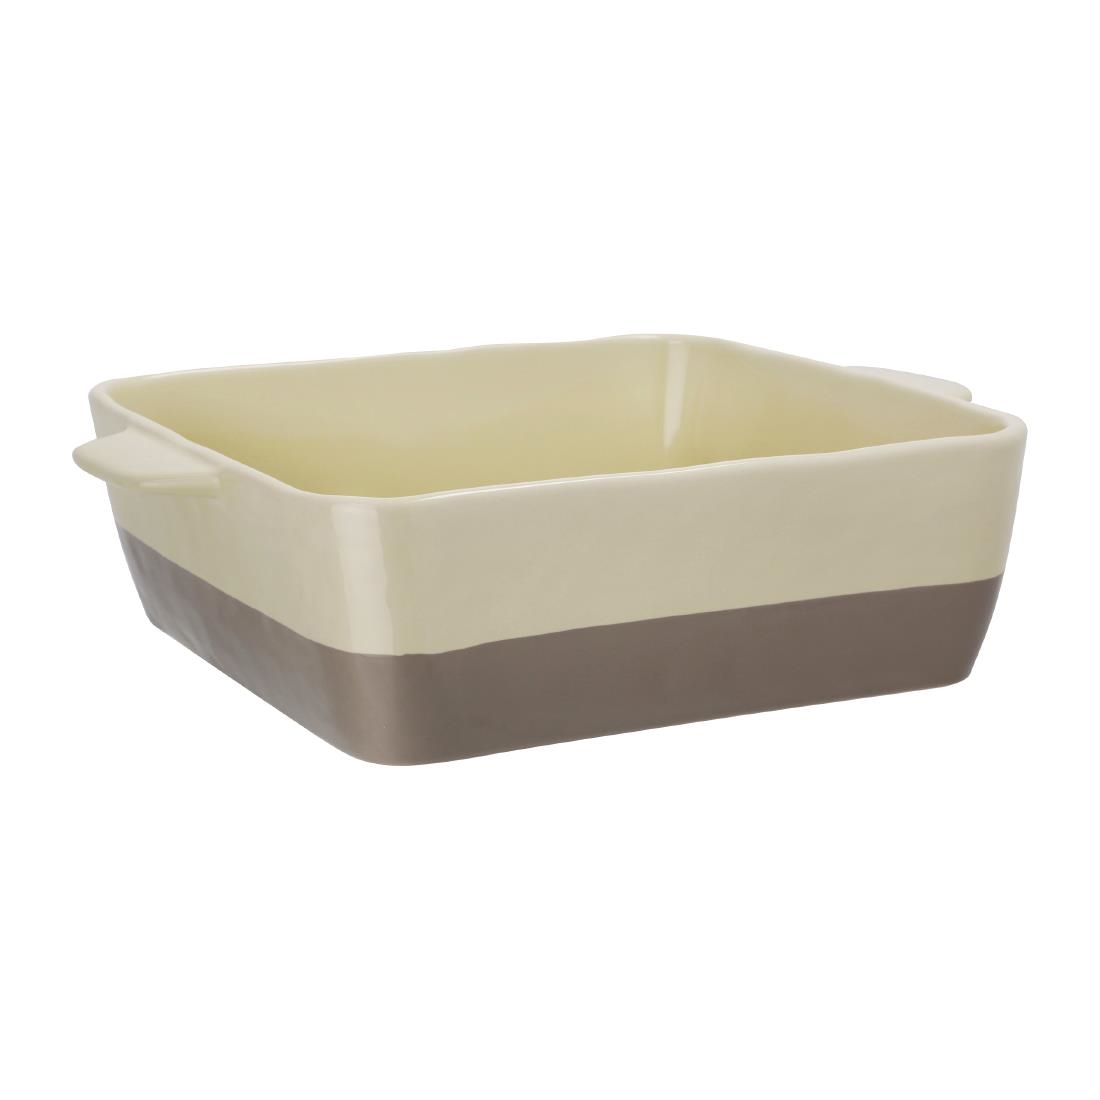 Olympia Cream And Taupe Ceramic Roasting Dish 4.2Ltr